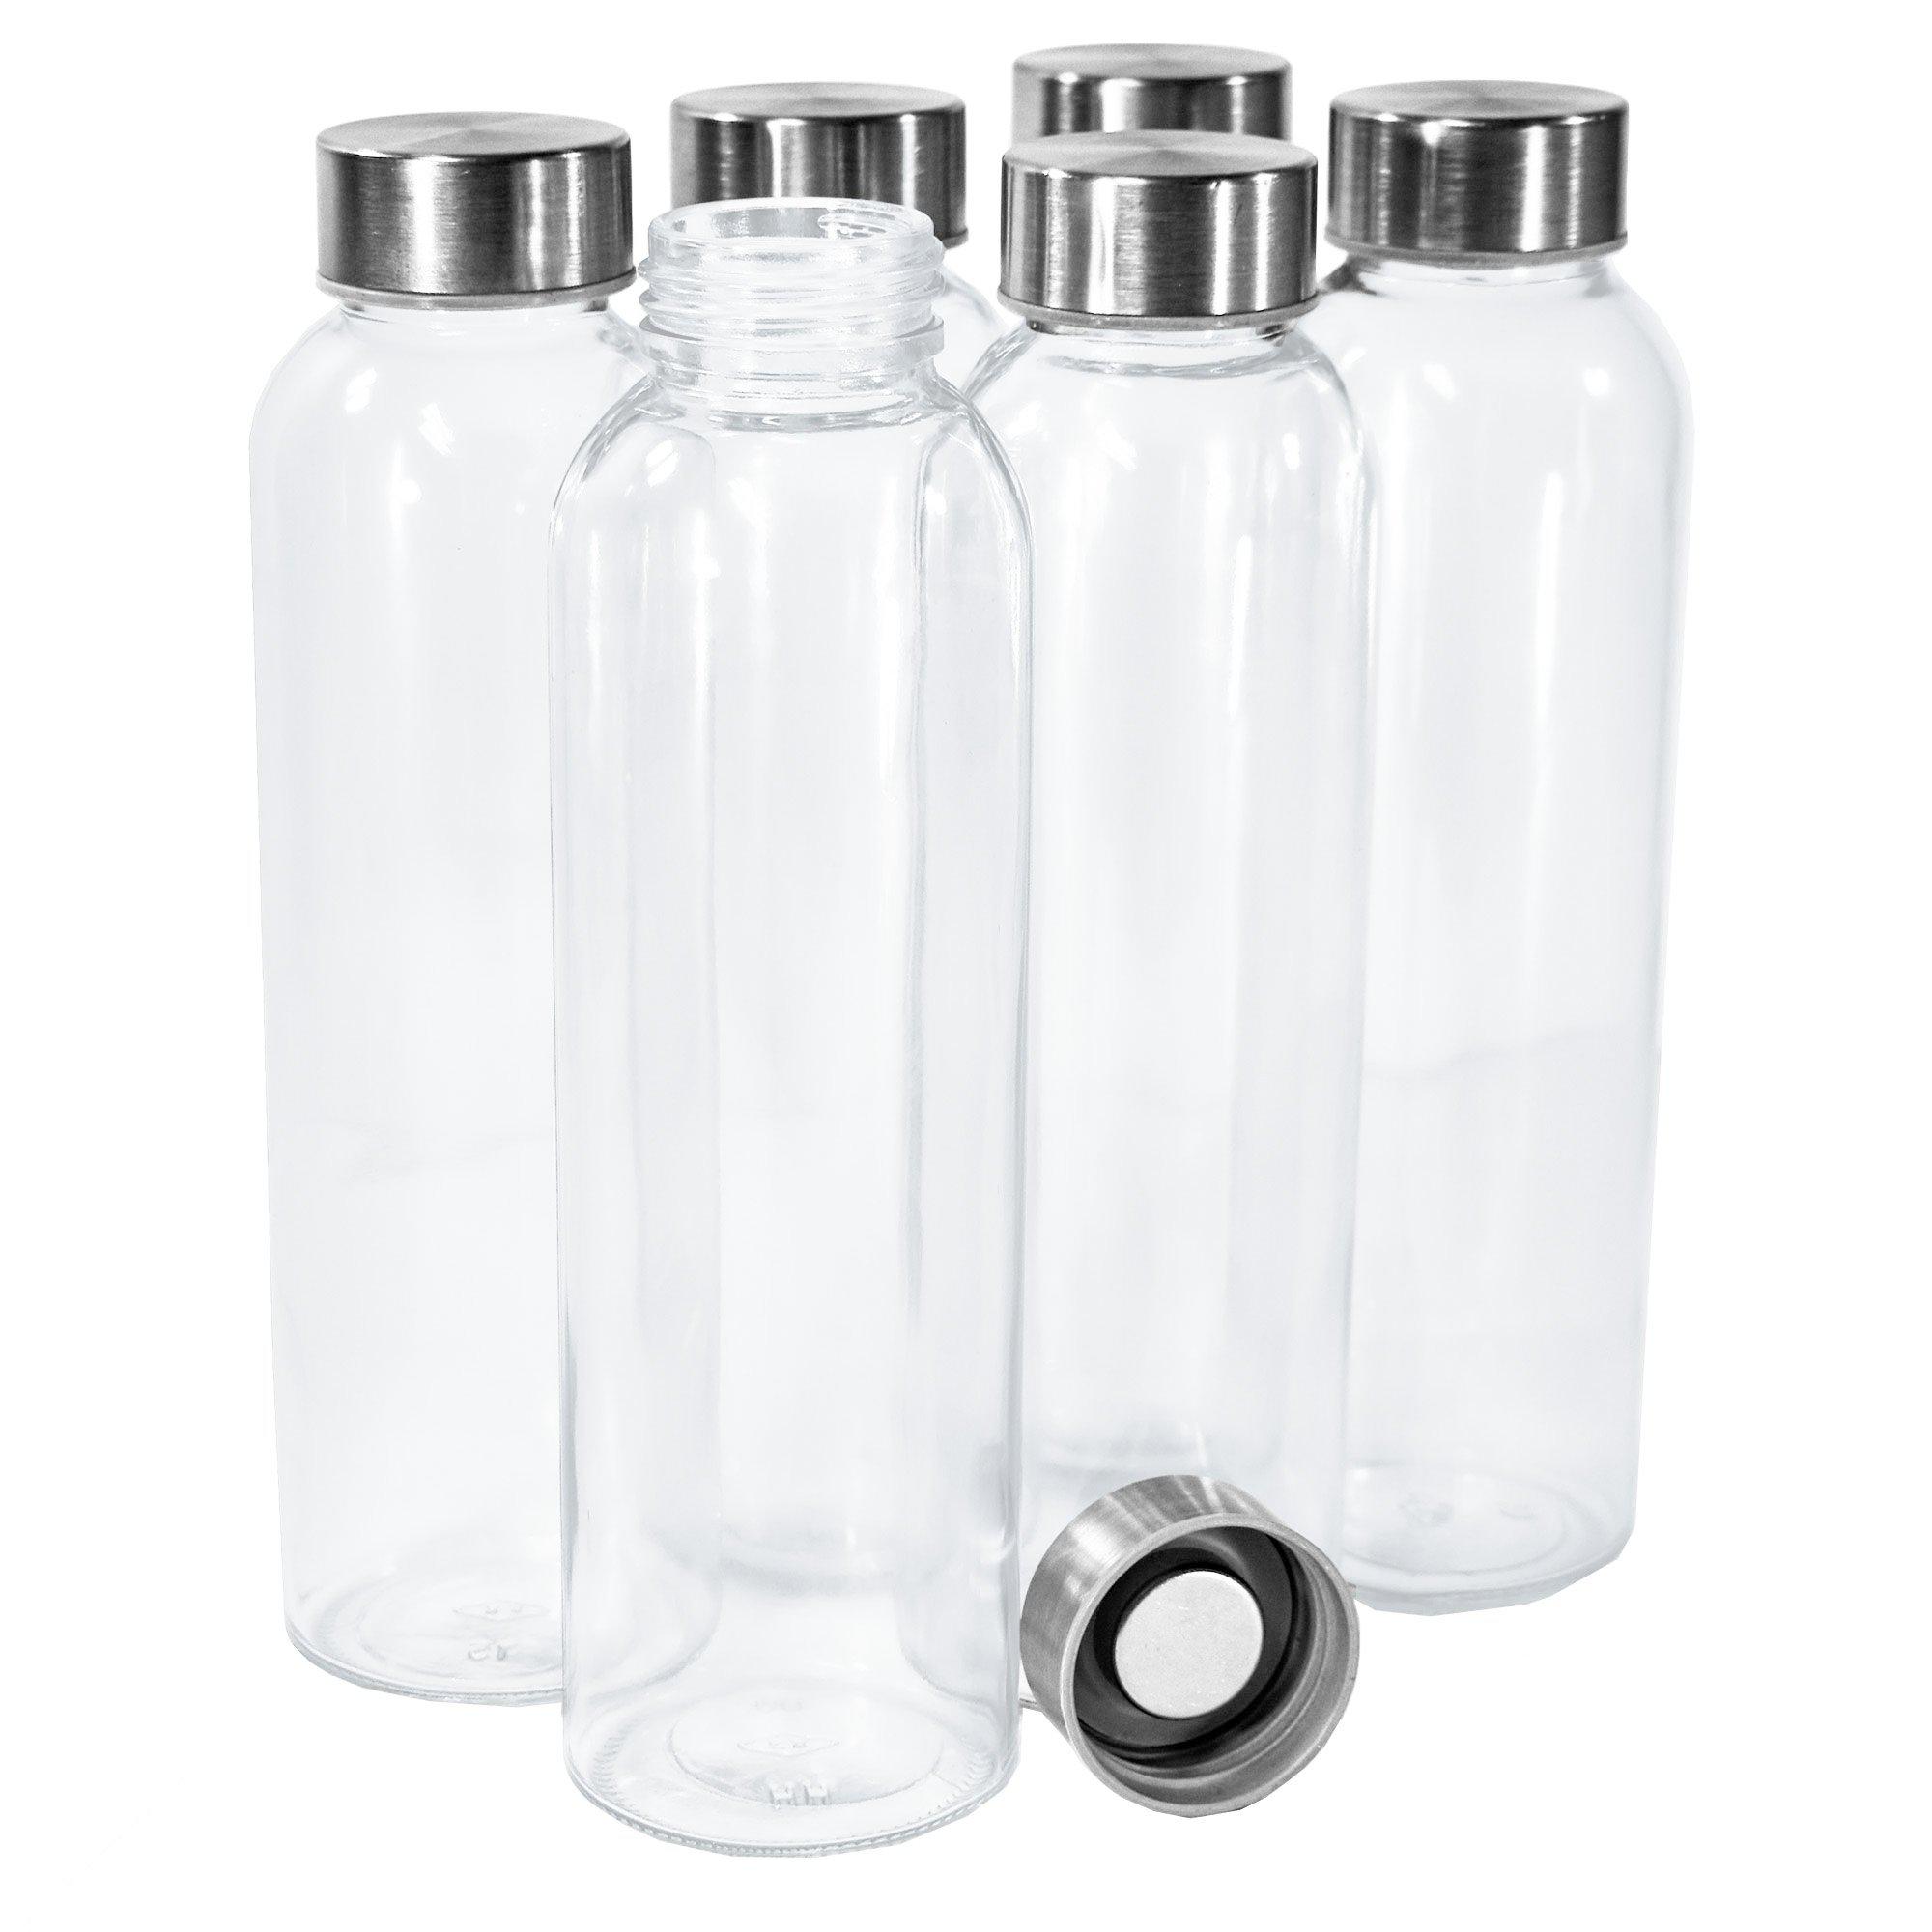 Clear Glass Water Bottle: Order now